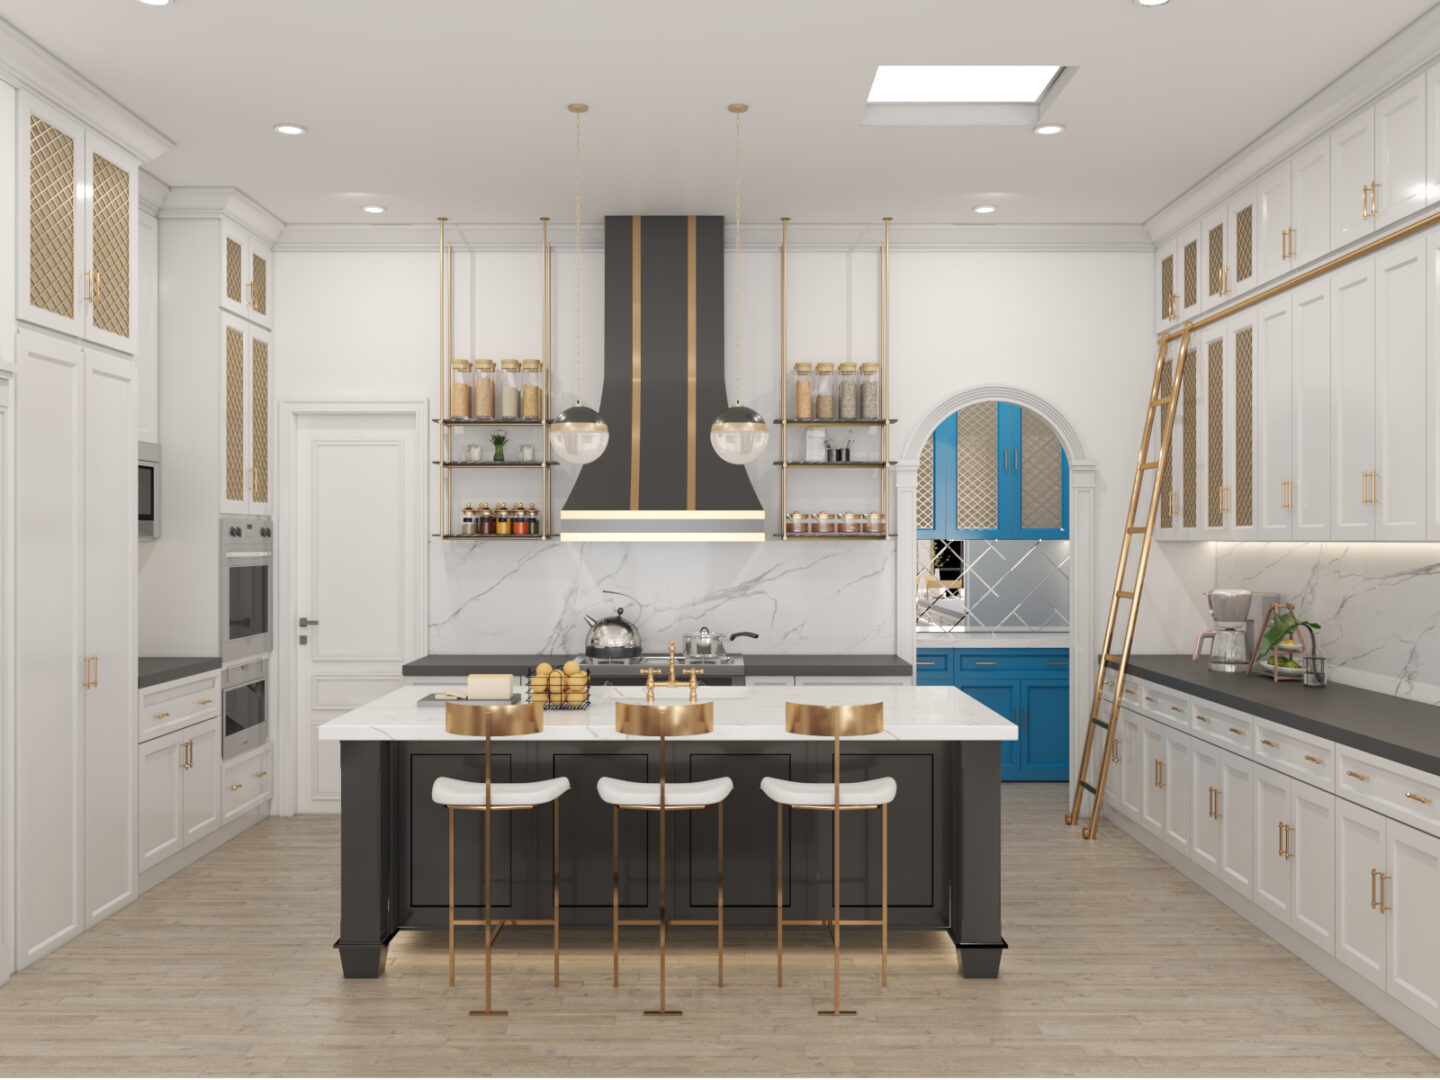 Hollywood Regency Kitchen Renderings, Home Interior, Interior Design, Kitchen Remodel, Dallas Home Remodel, Black, White and Brass Kitchen Ideas